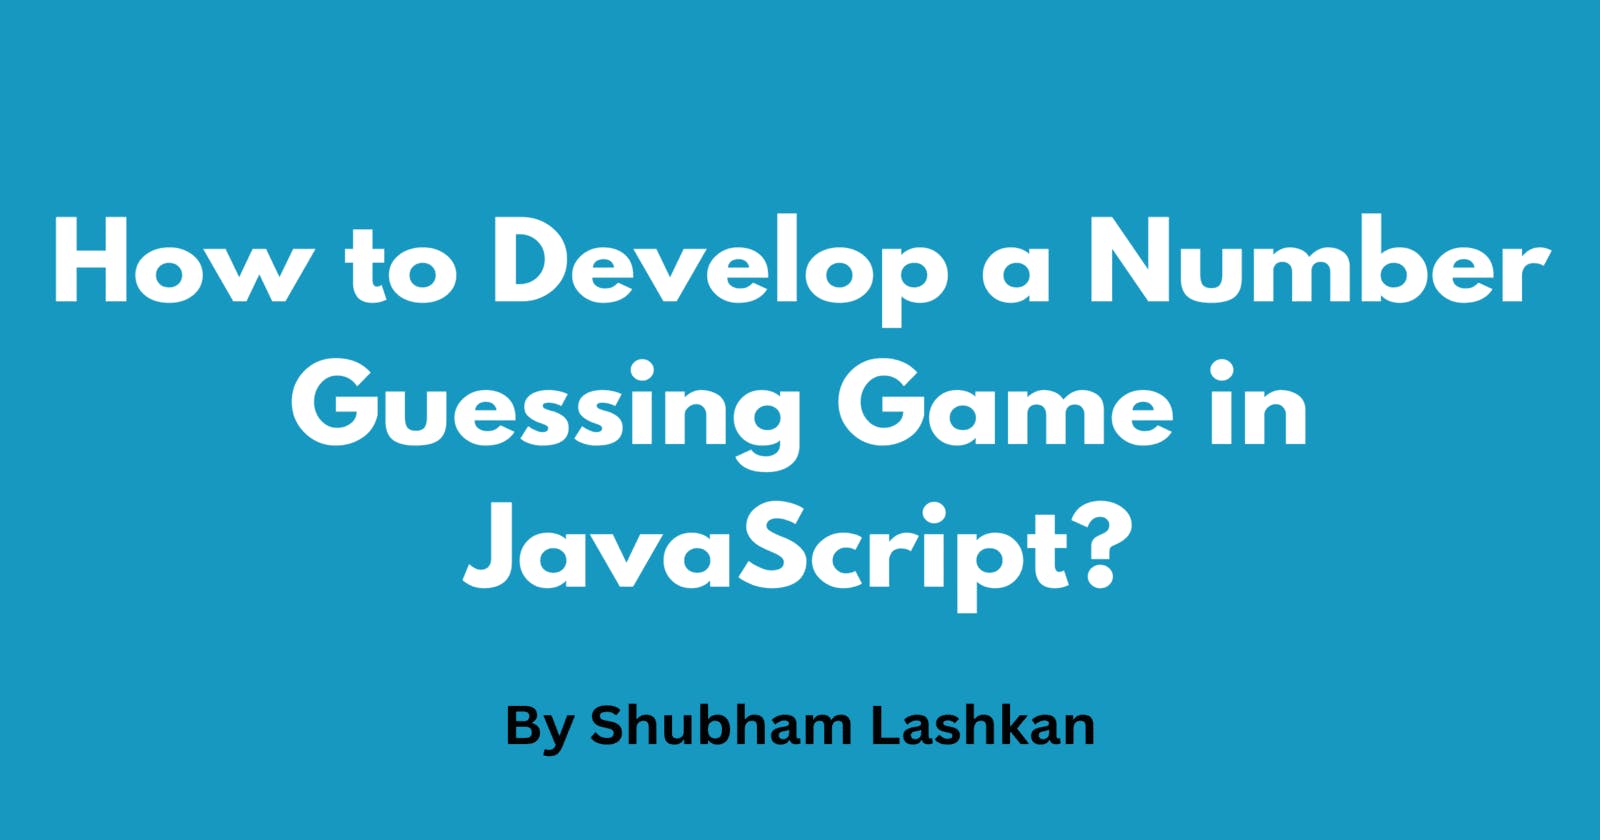 How to Develop a Number Guessing Game in JavaScript?